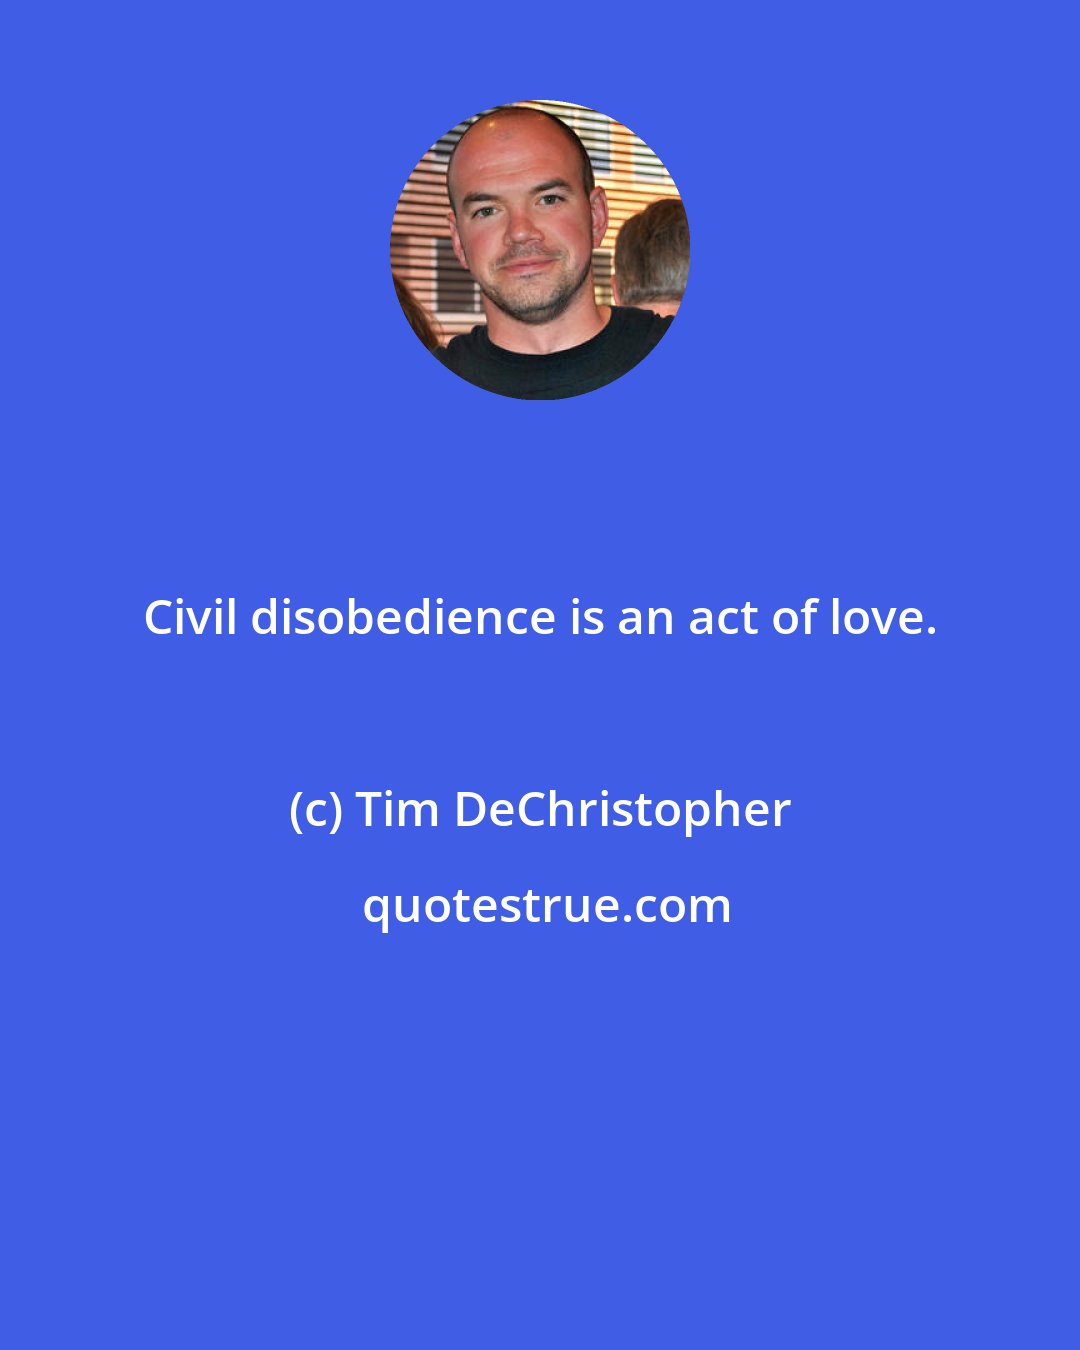 Tim DeChristopher: Civil disobedience is an act of love.